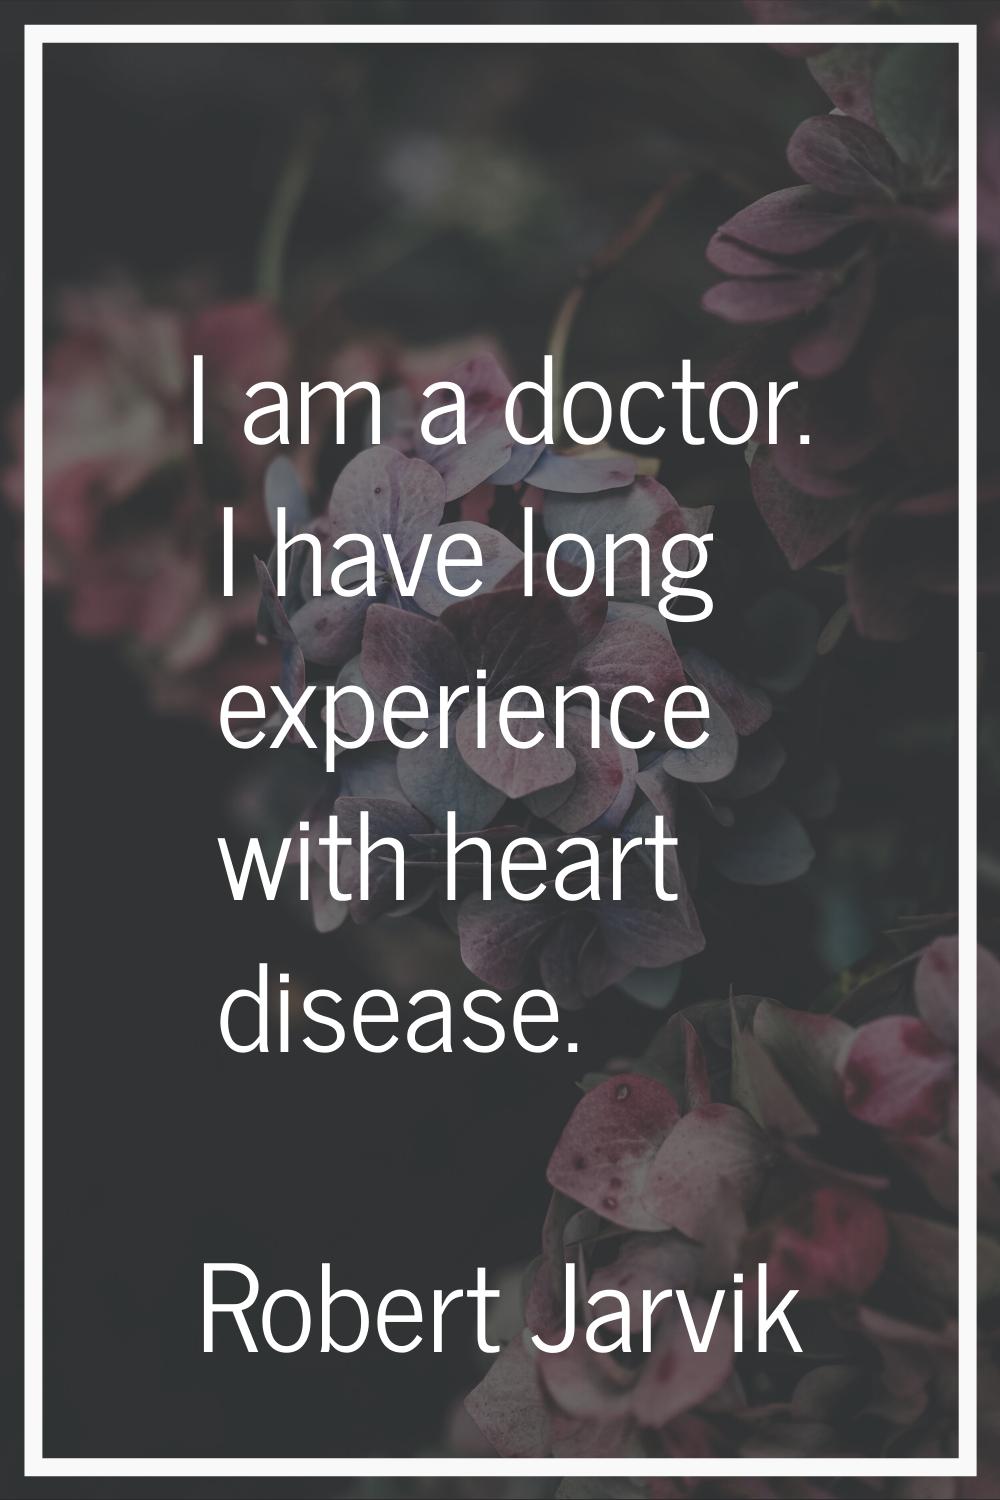 I am a doctor. I have long experience with heart disease.